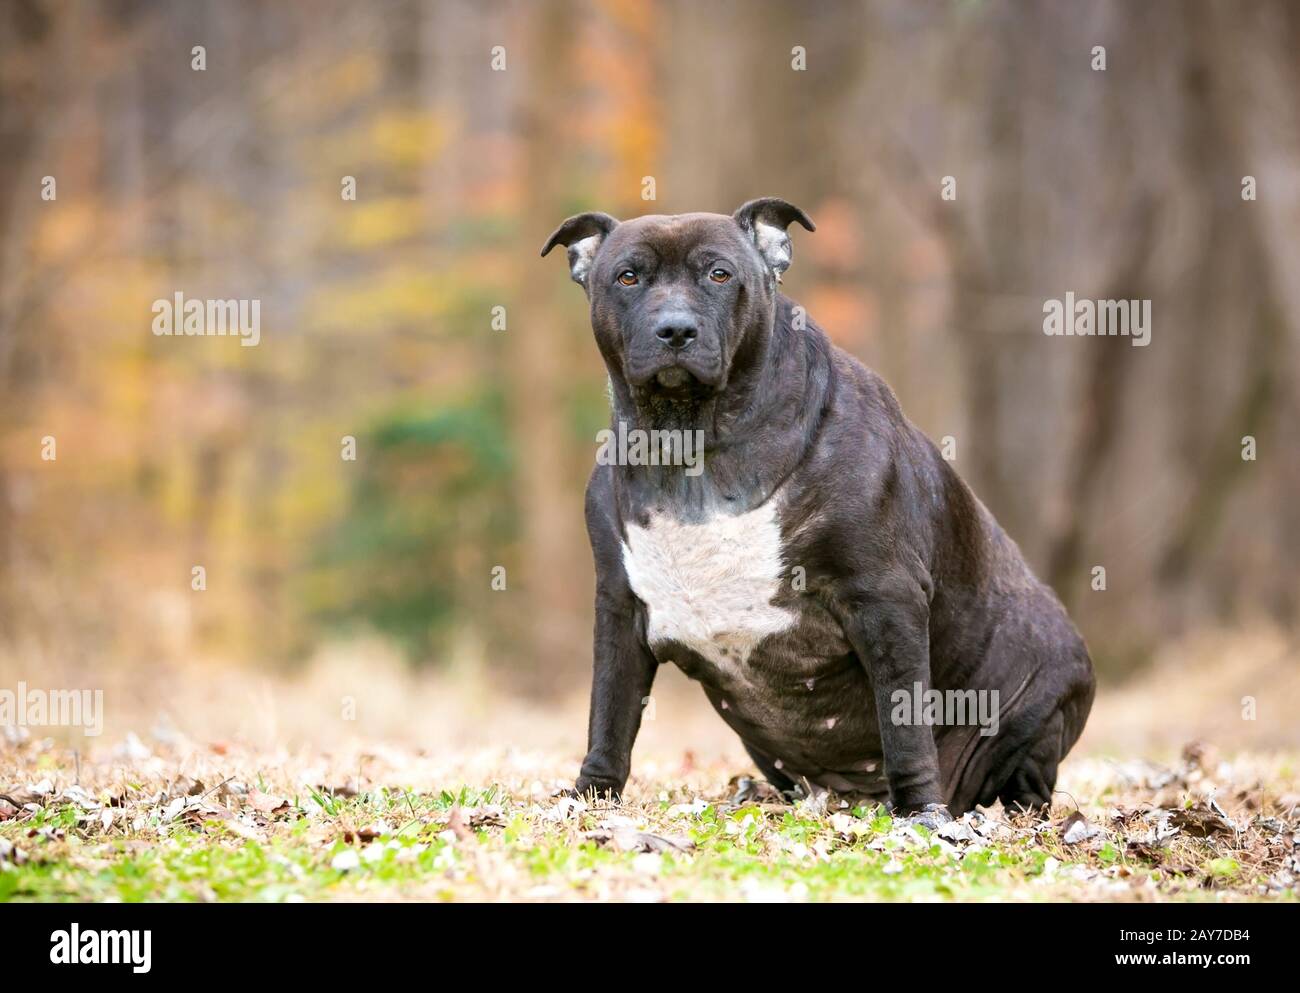 An obese Pit Bull Terrier mixed breed dog sitting outdoors Stock Photo